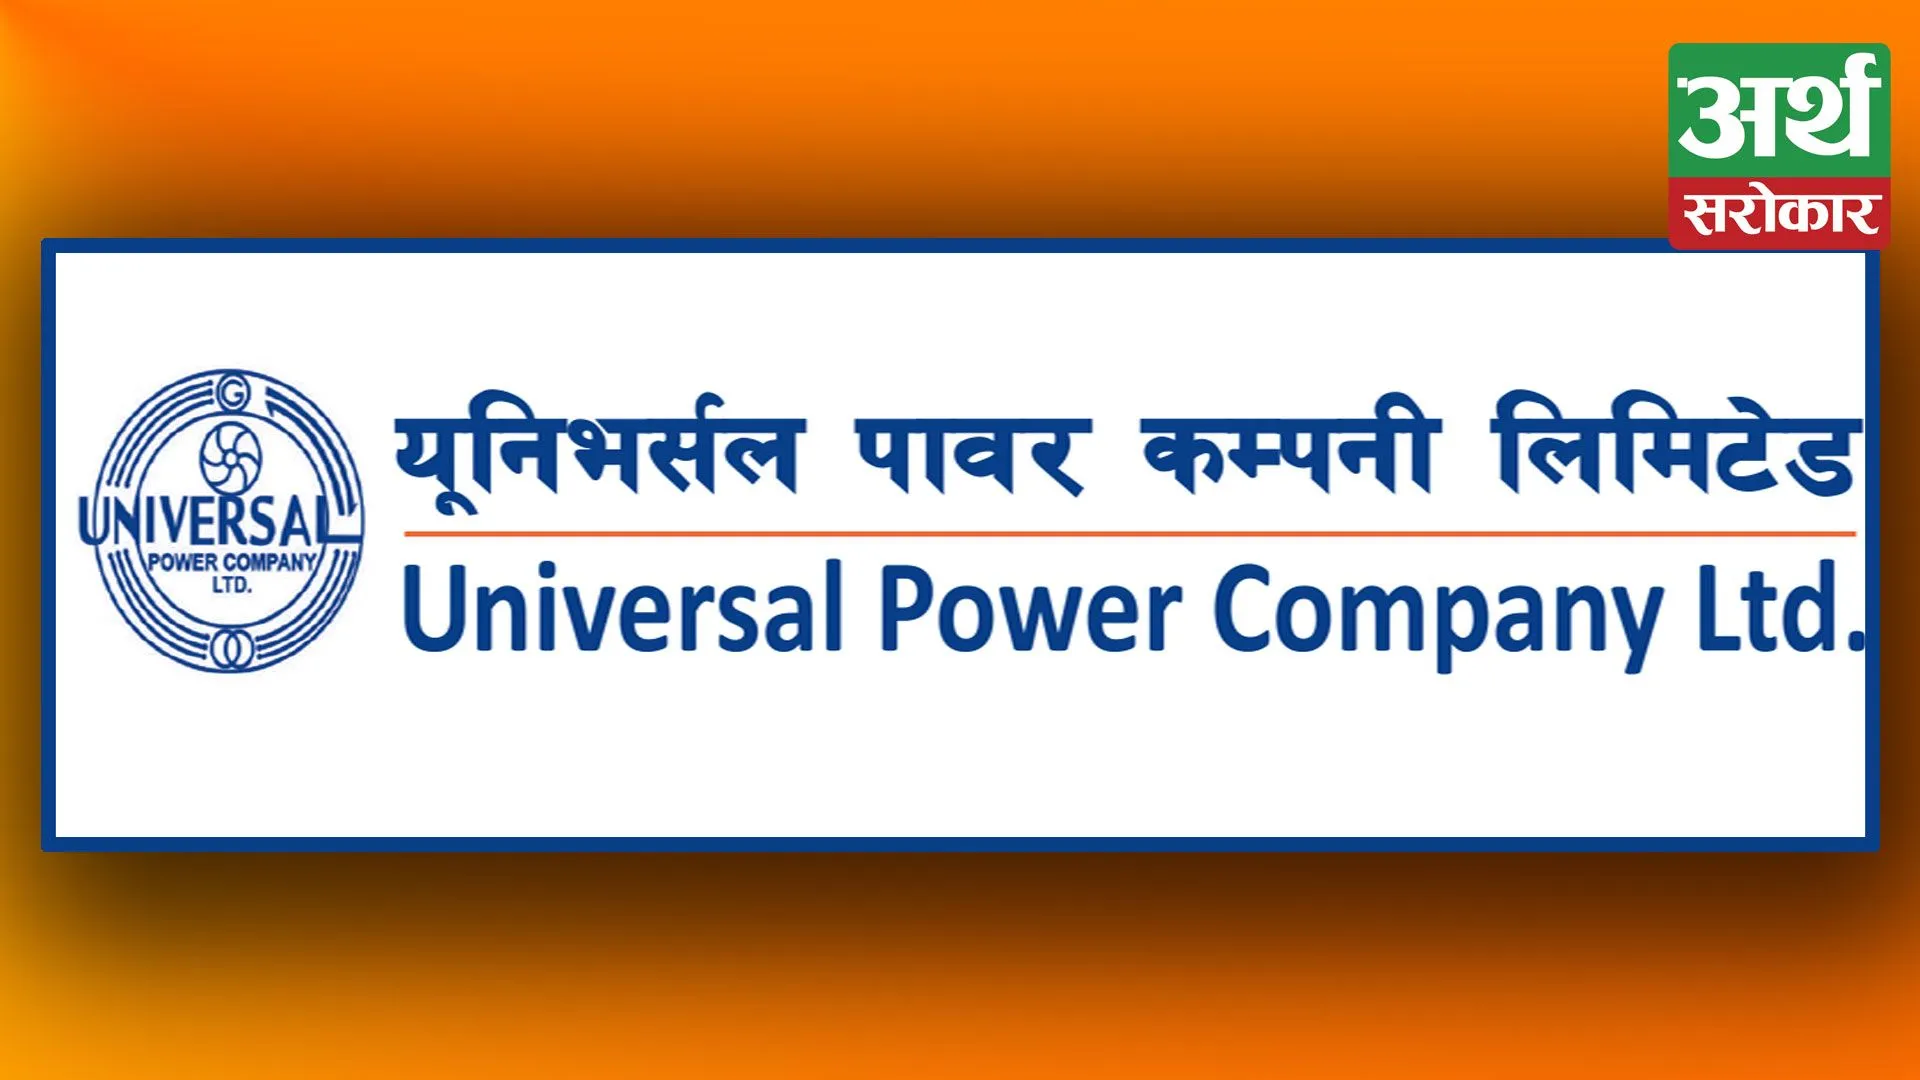 Universal Power Company will distribute 9% dividend